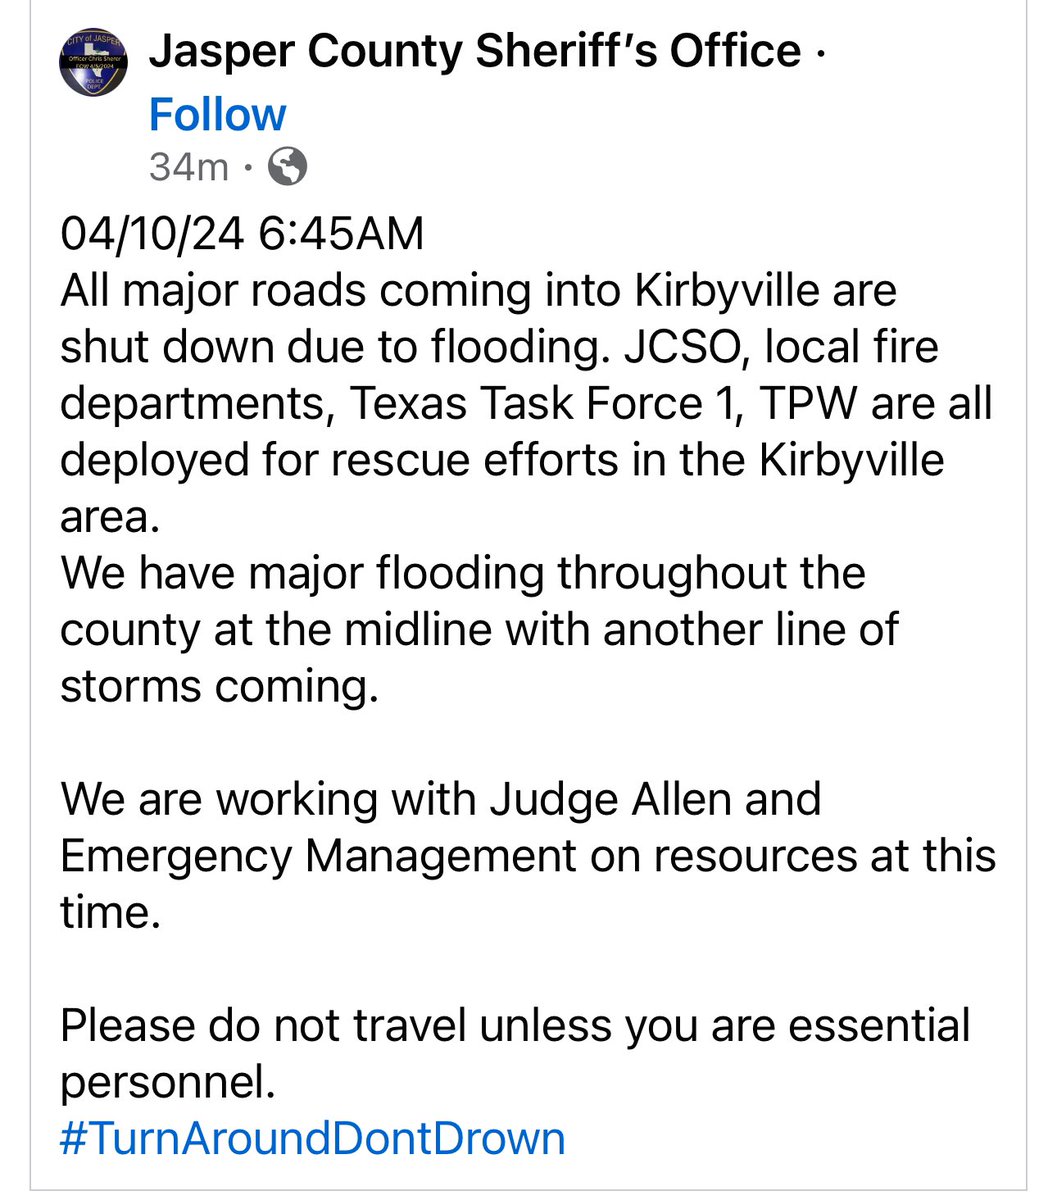 ATTN KIRBYVILLE 🚨 Please see the below post from the Jasper County Sheriff’s Office concerning flooding on all major roads coming into Kirbyville. My team and I have been in contact with @TDEM this morning to receive updates. TDEM has activated nearby boat squads and emergency